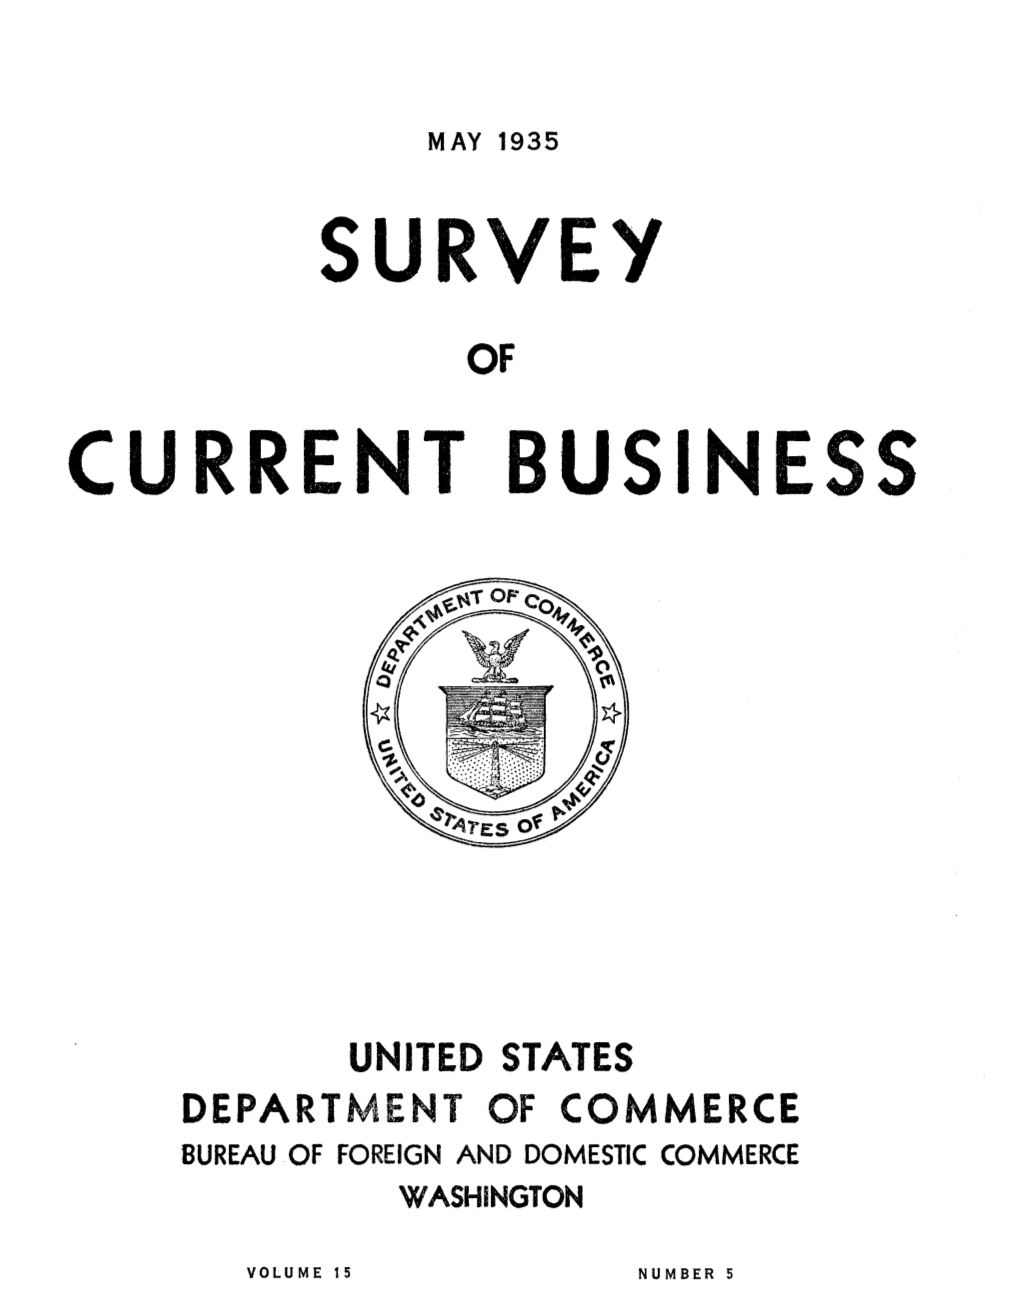 SURVEY of CURRENT BUSINESS May 1935